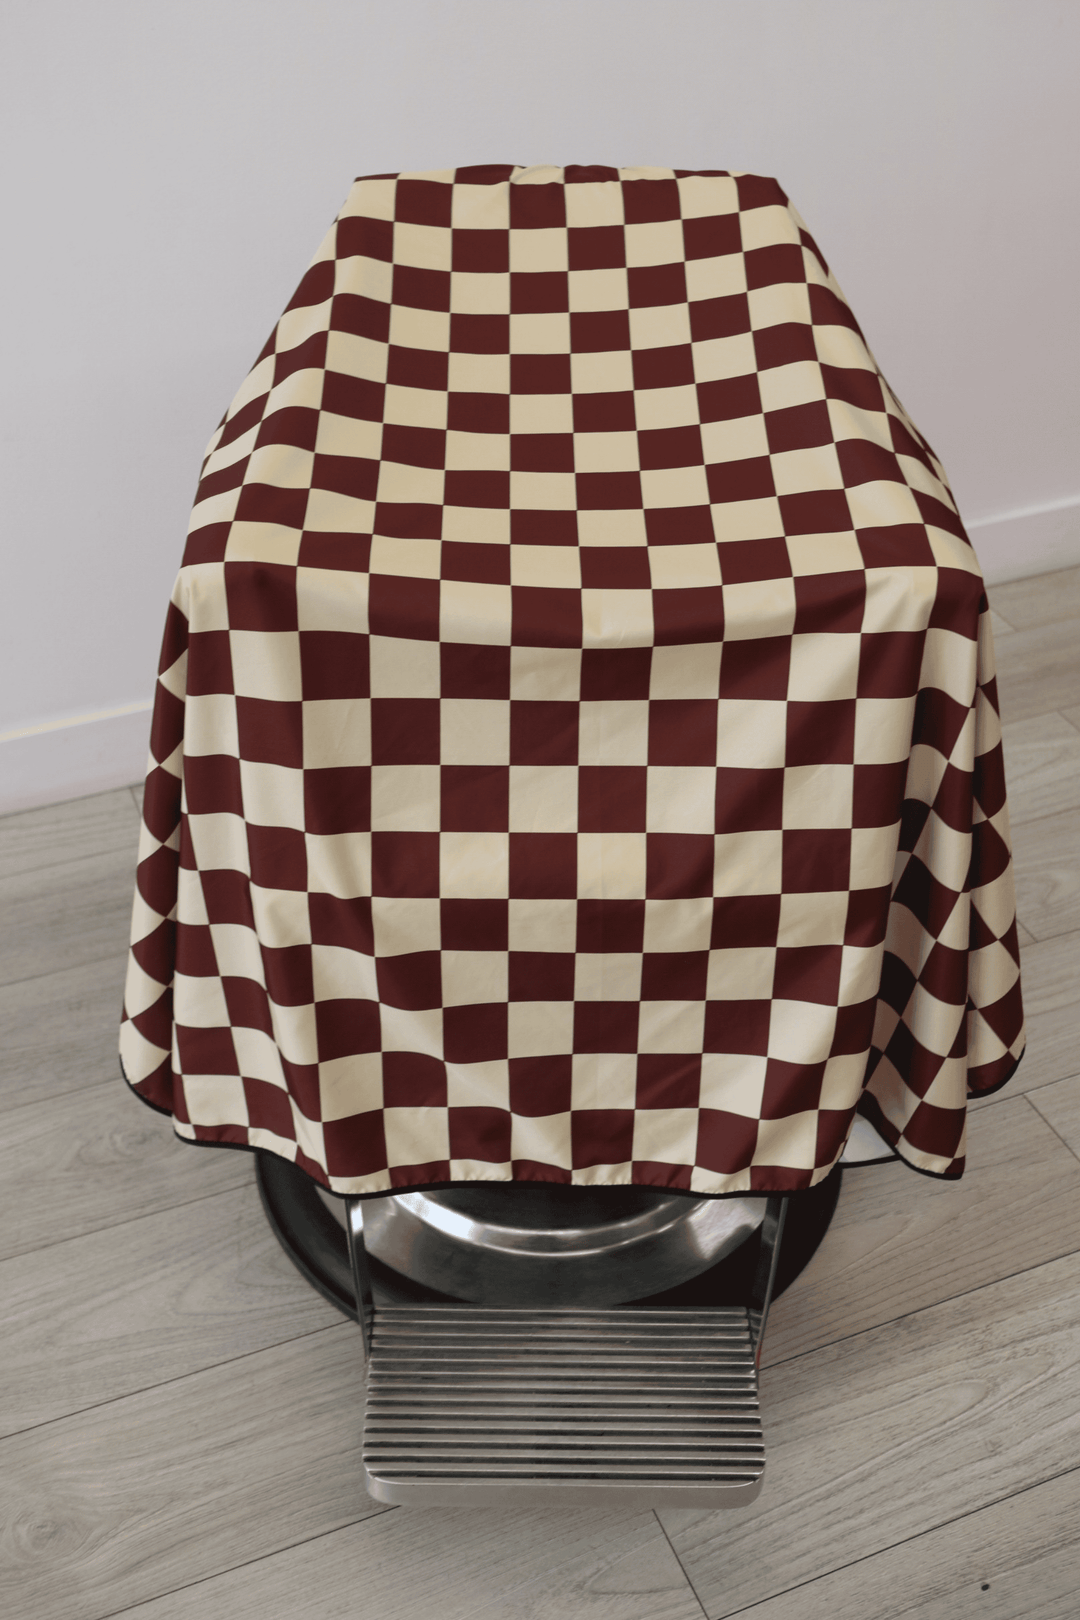 top view of Check Cape showcasing the burgundy and tan checker pattern of the cape.